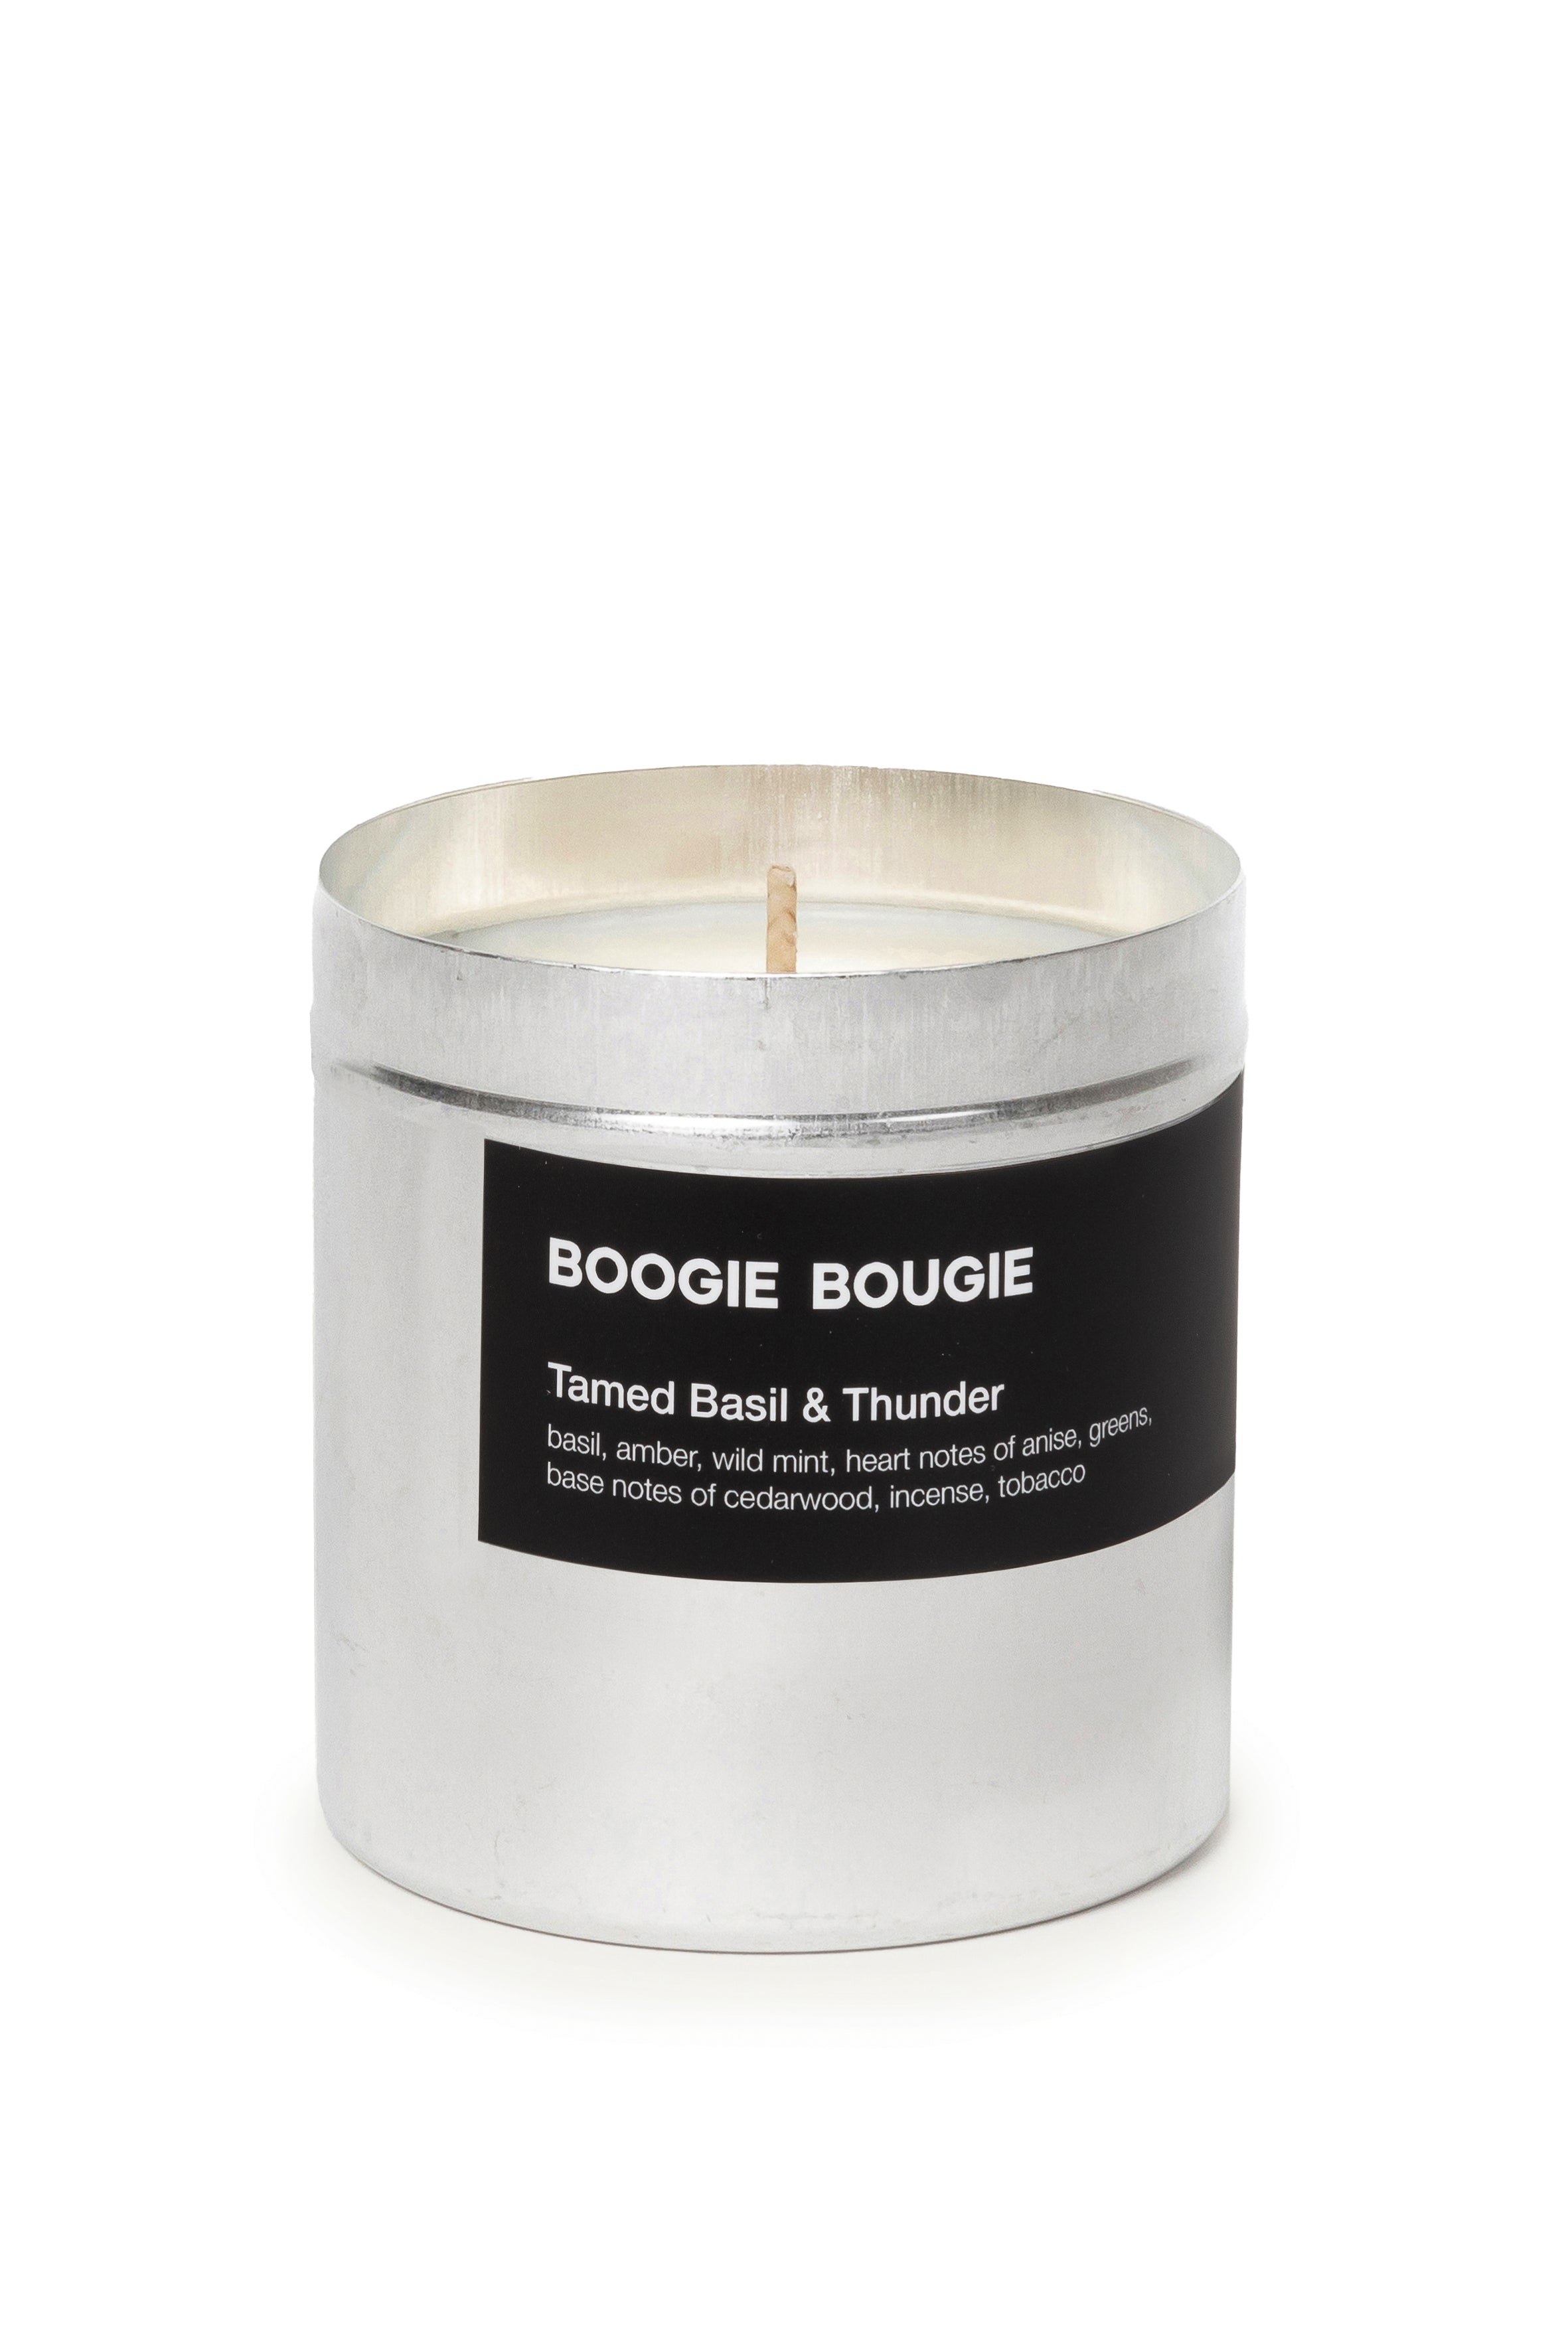 Scented Candle Tamed Basil & Thunder-Boogie Bougie-KIOSK48TH